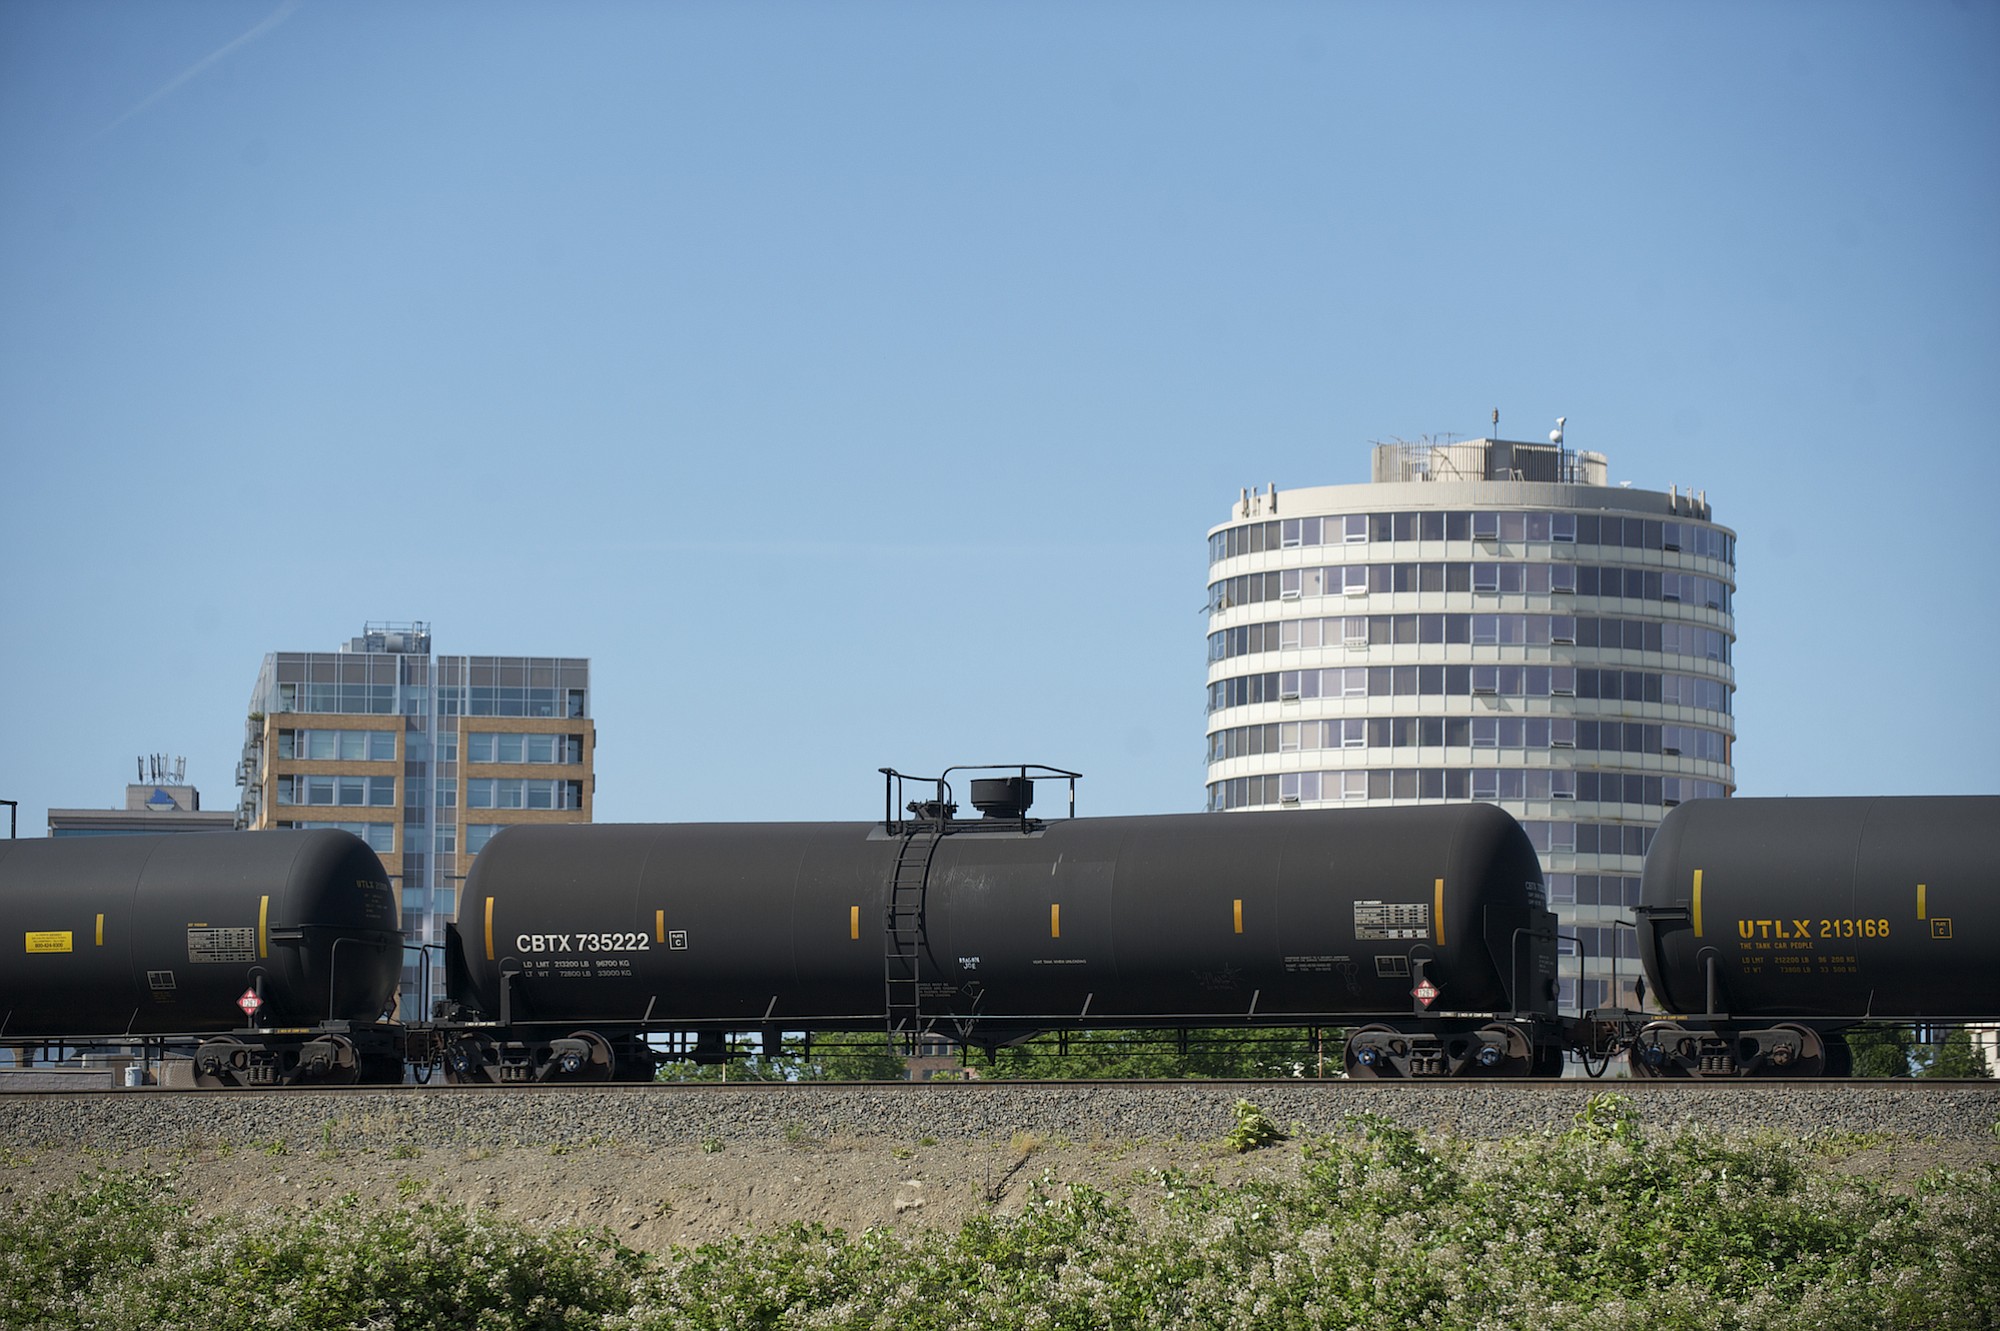 Trains carrying crude from the Bakken formation in North Dakota would increase if a proposed oil-by-rail terminal were approved for the Port of Vancouver, which is why several neighborhoods near the tracks oppose the project.